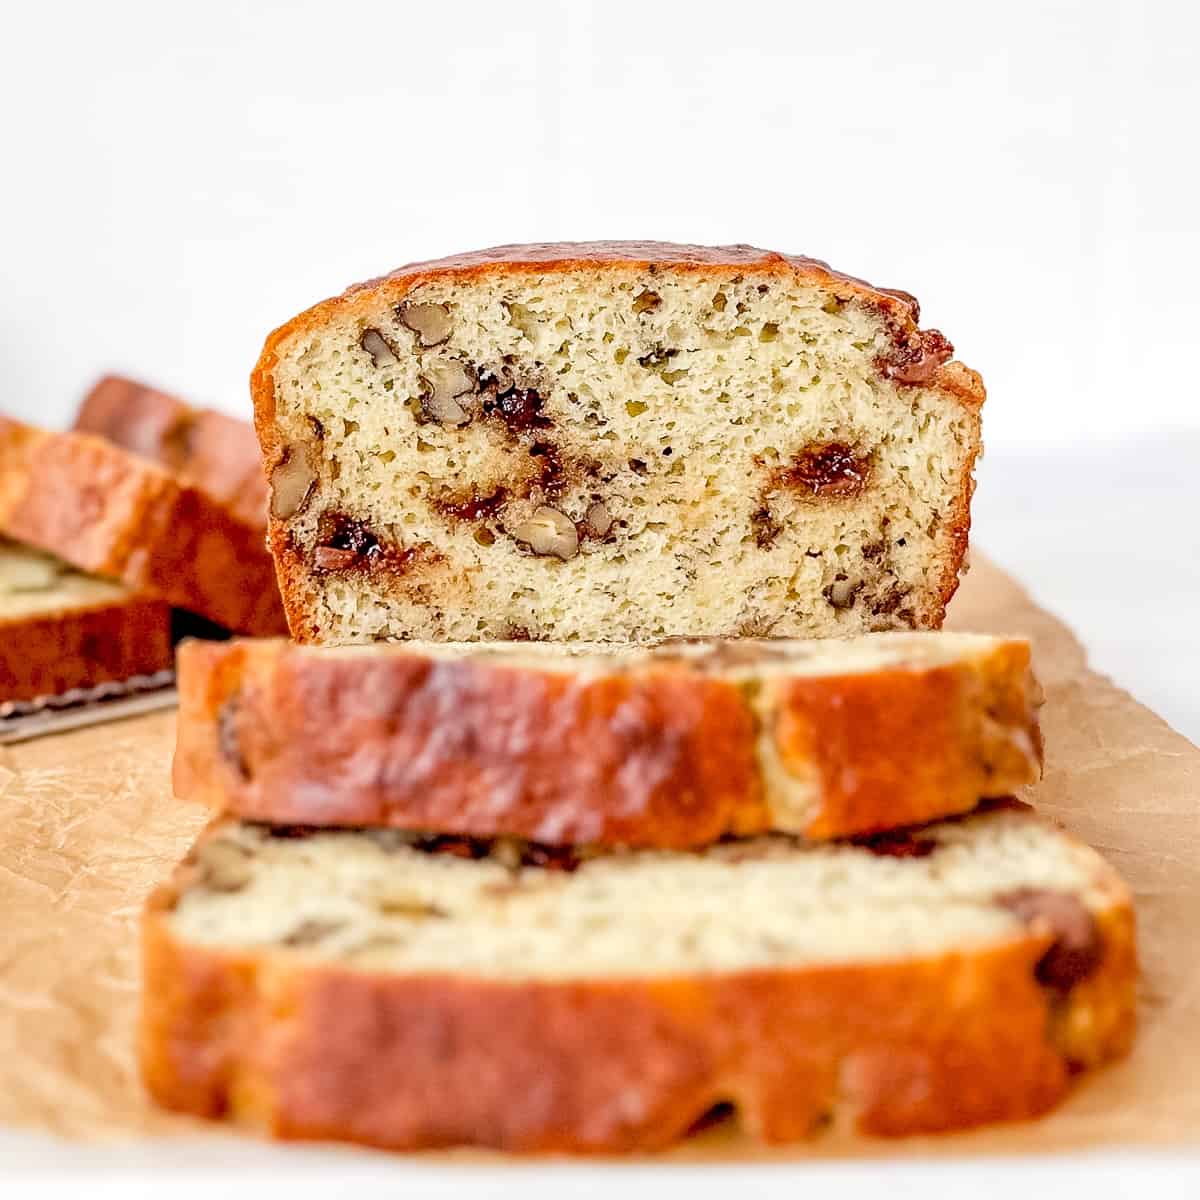 Front view of a sliced loaf of banana bread.